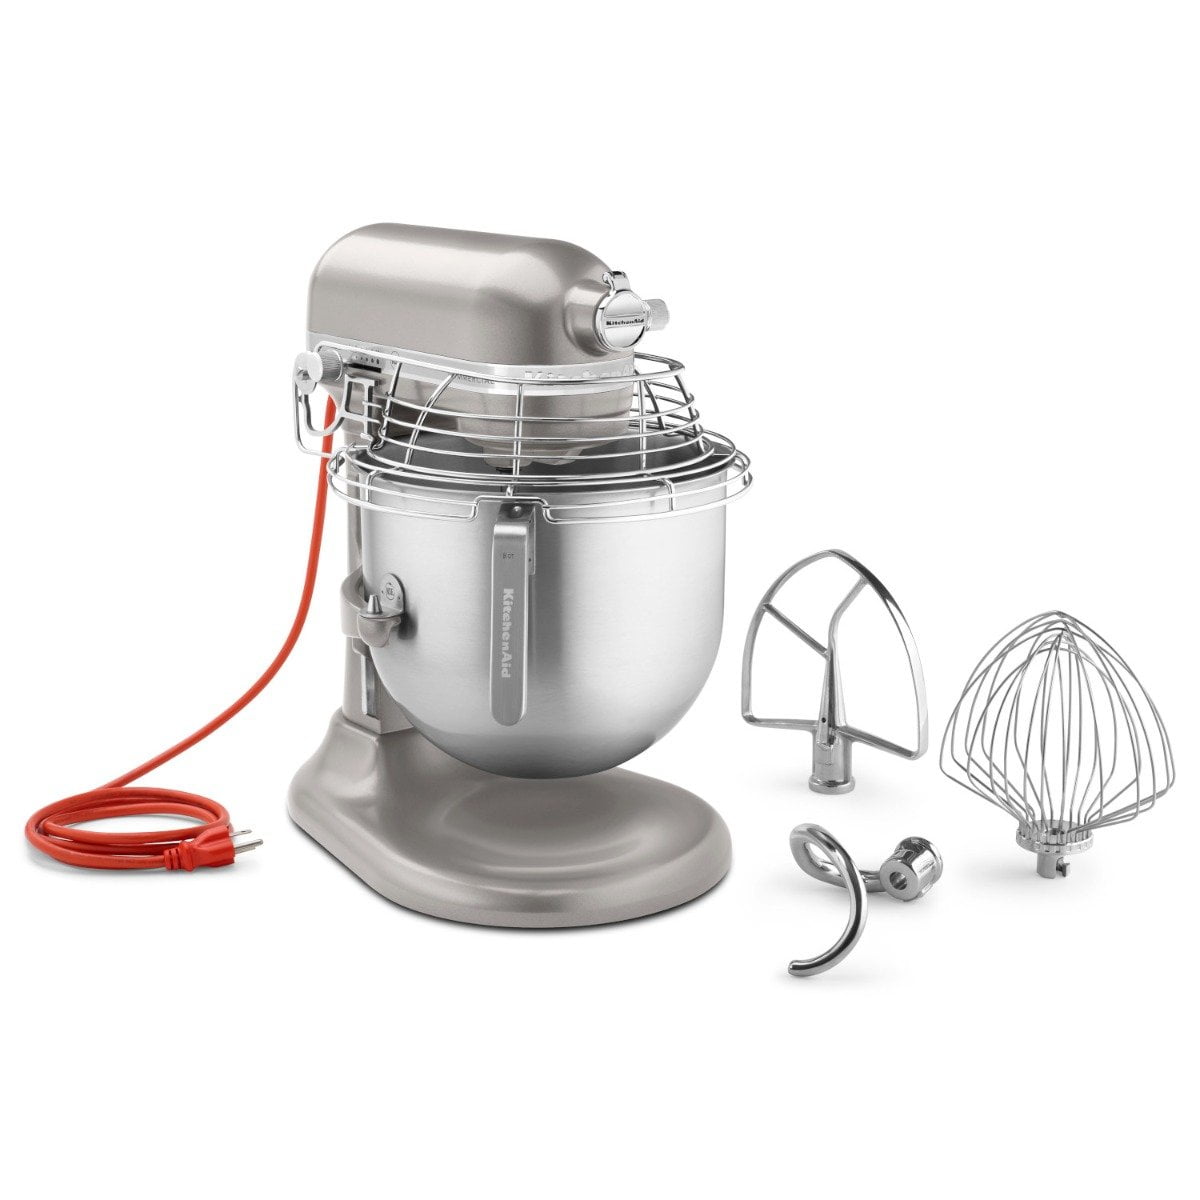 KSMC895WH in White by KitchenAid in Honolulu, HI - NSF Certified®  Commercial Series 8 Quart Bowl-Lift Stand Mixer with Stainless Steel Bowl  Guard